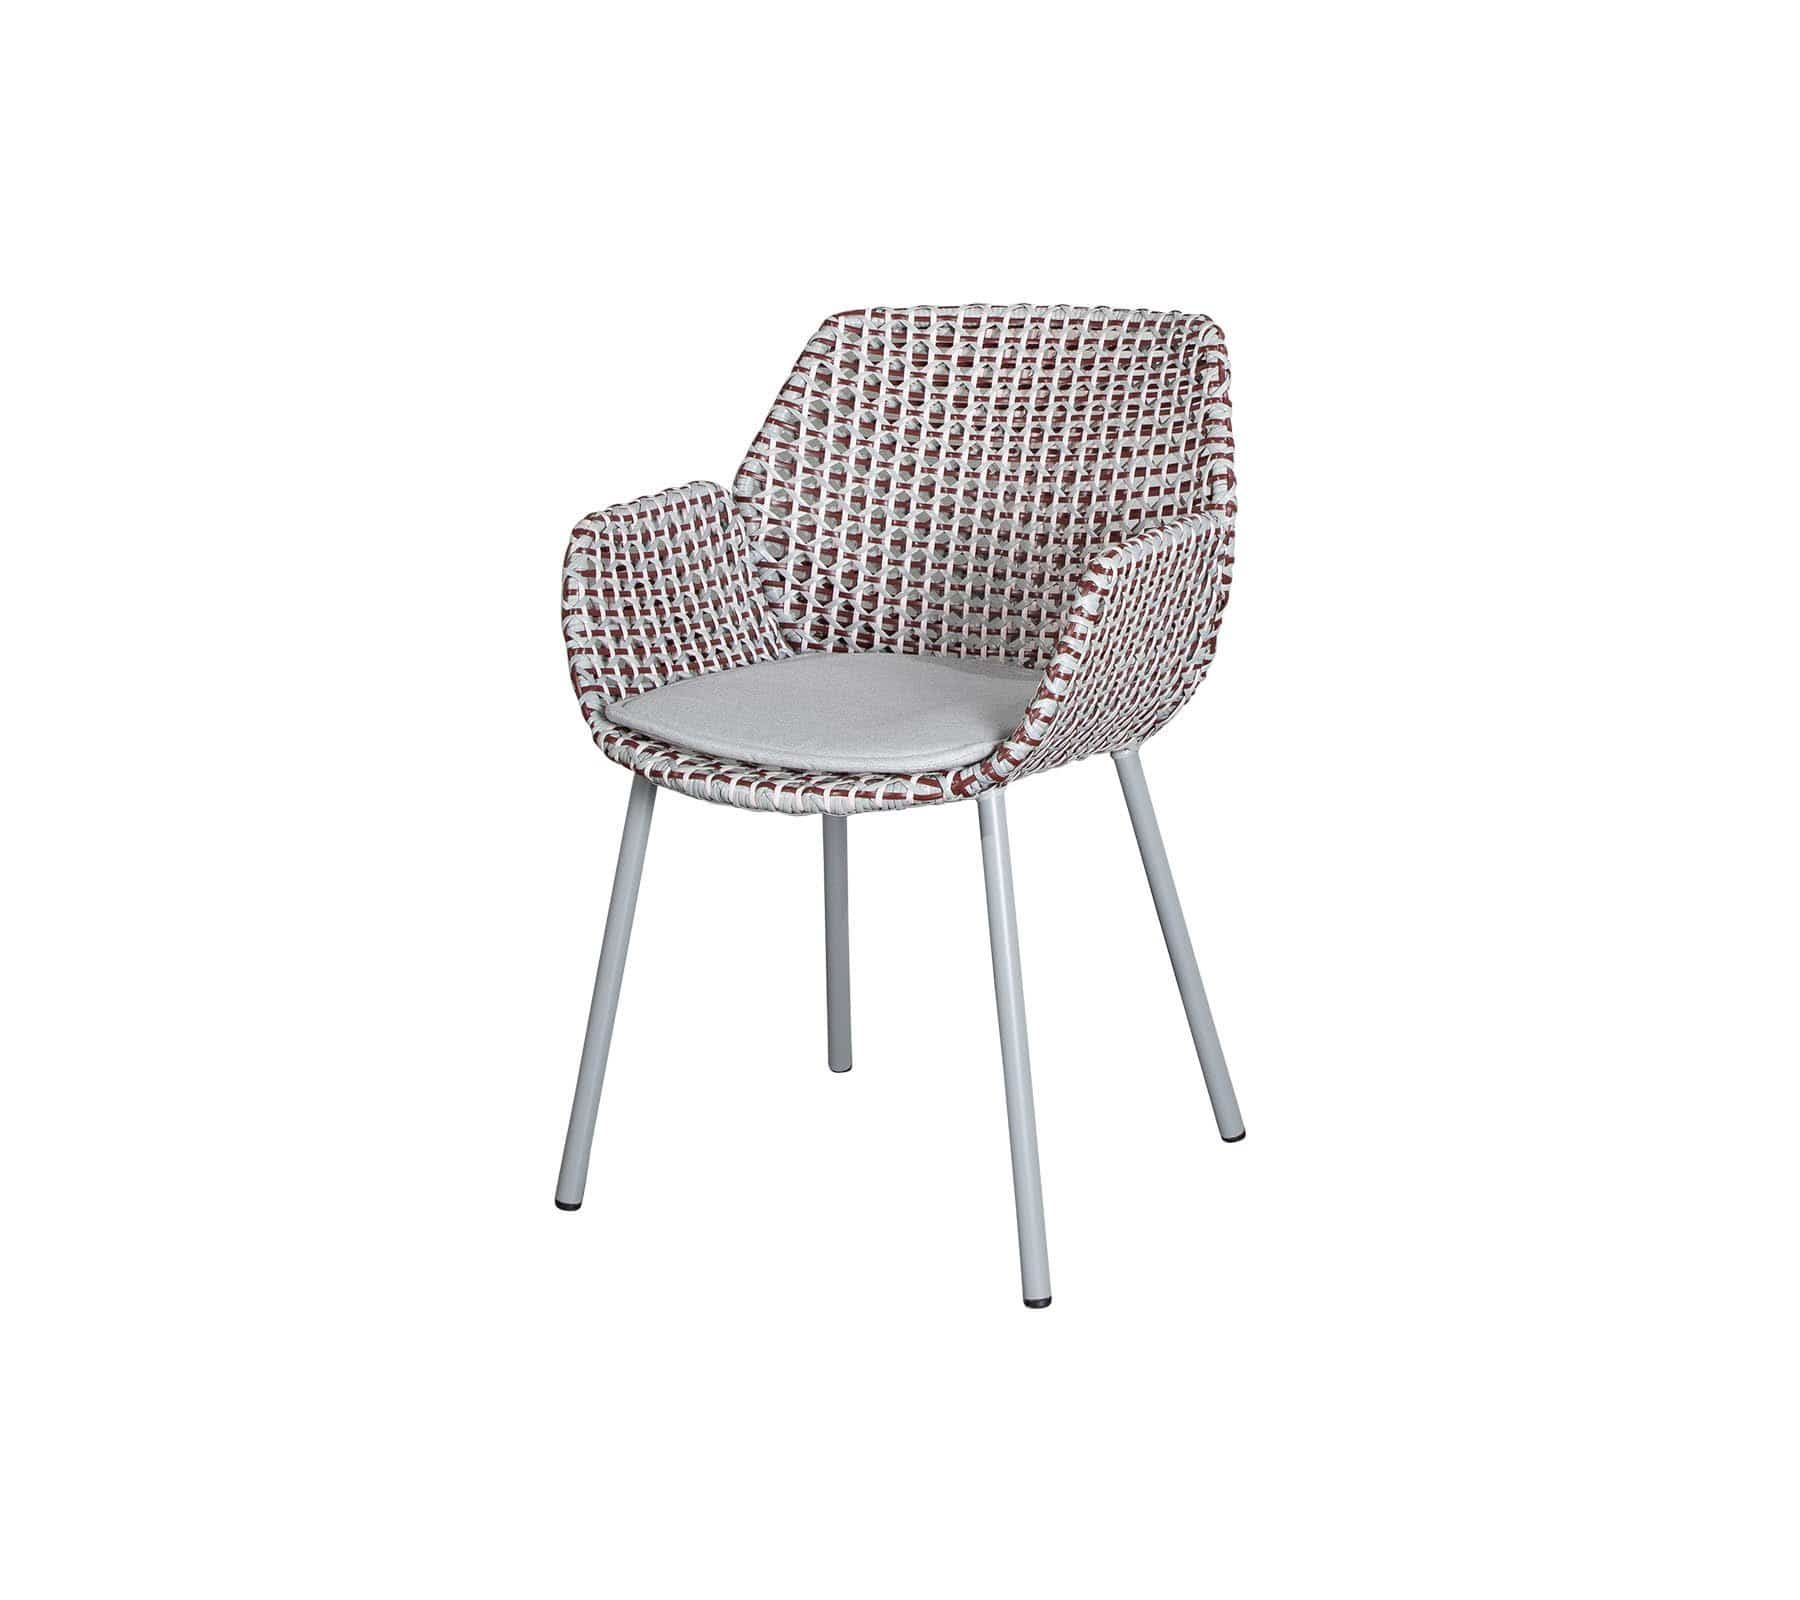 Boxhill's Vibe light grey / maroon outdoor armchair with light grey cushion on white background